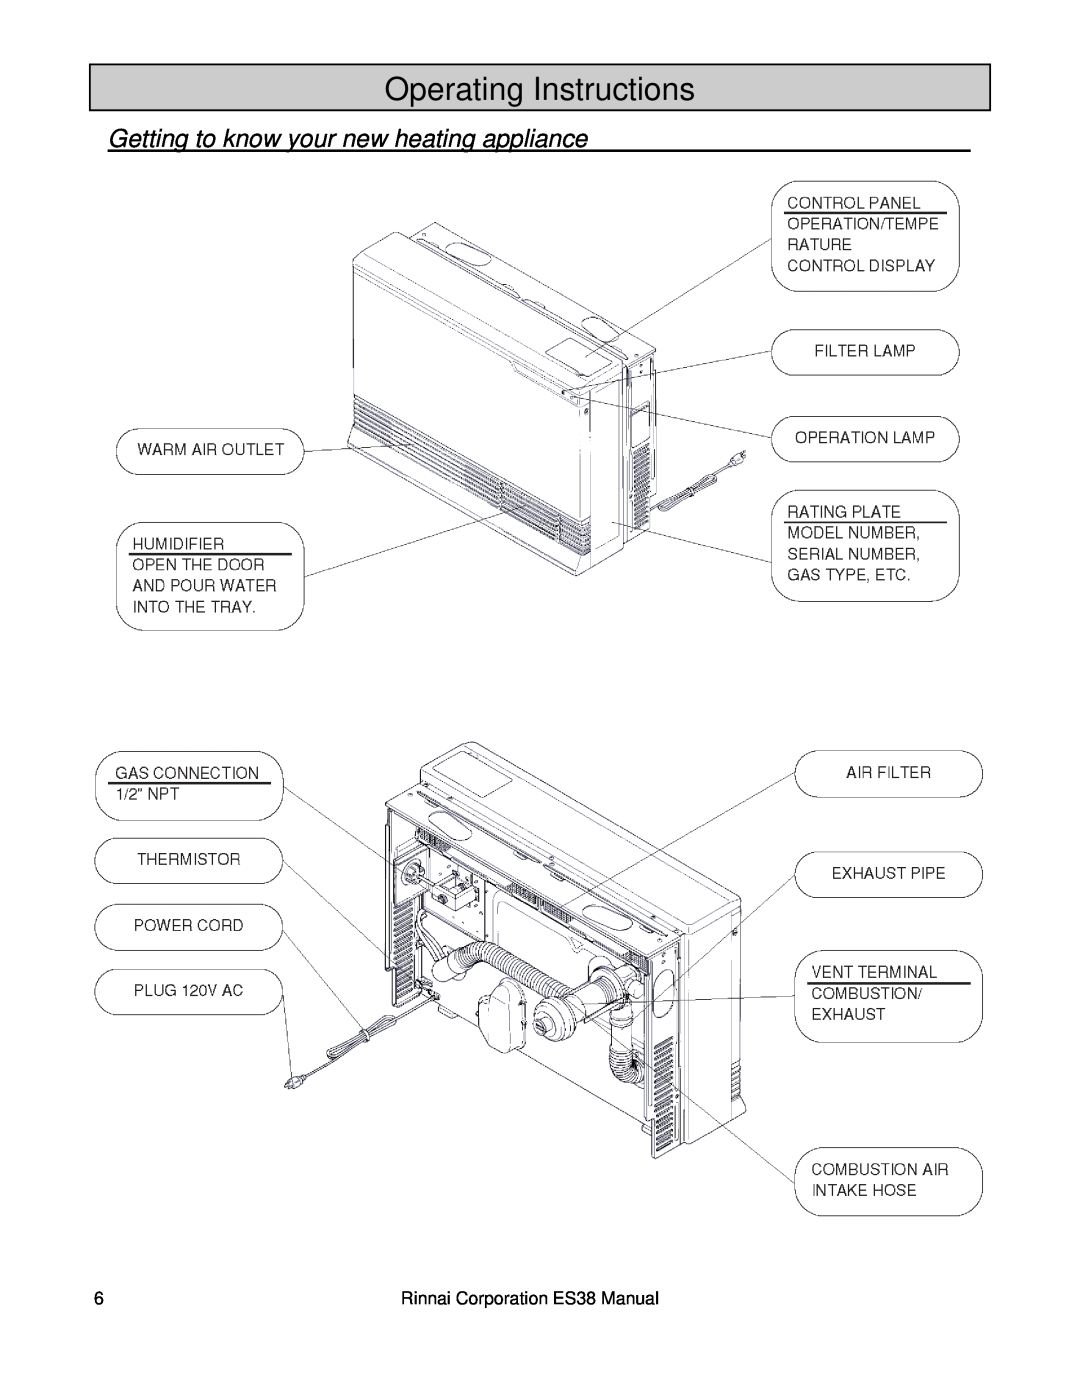 Rinnai ES38 installation manual Operating Instructions, Getting to know your new heating appliance 